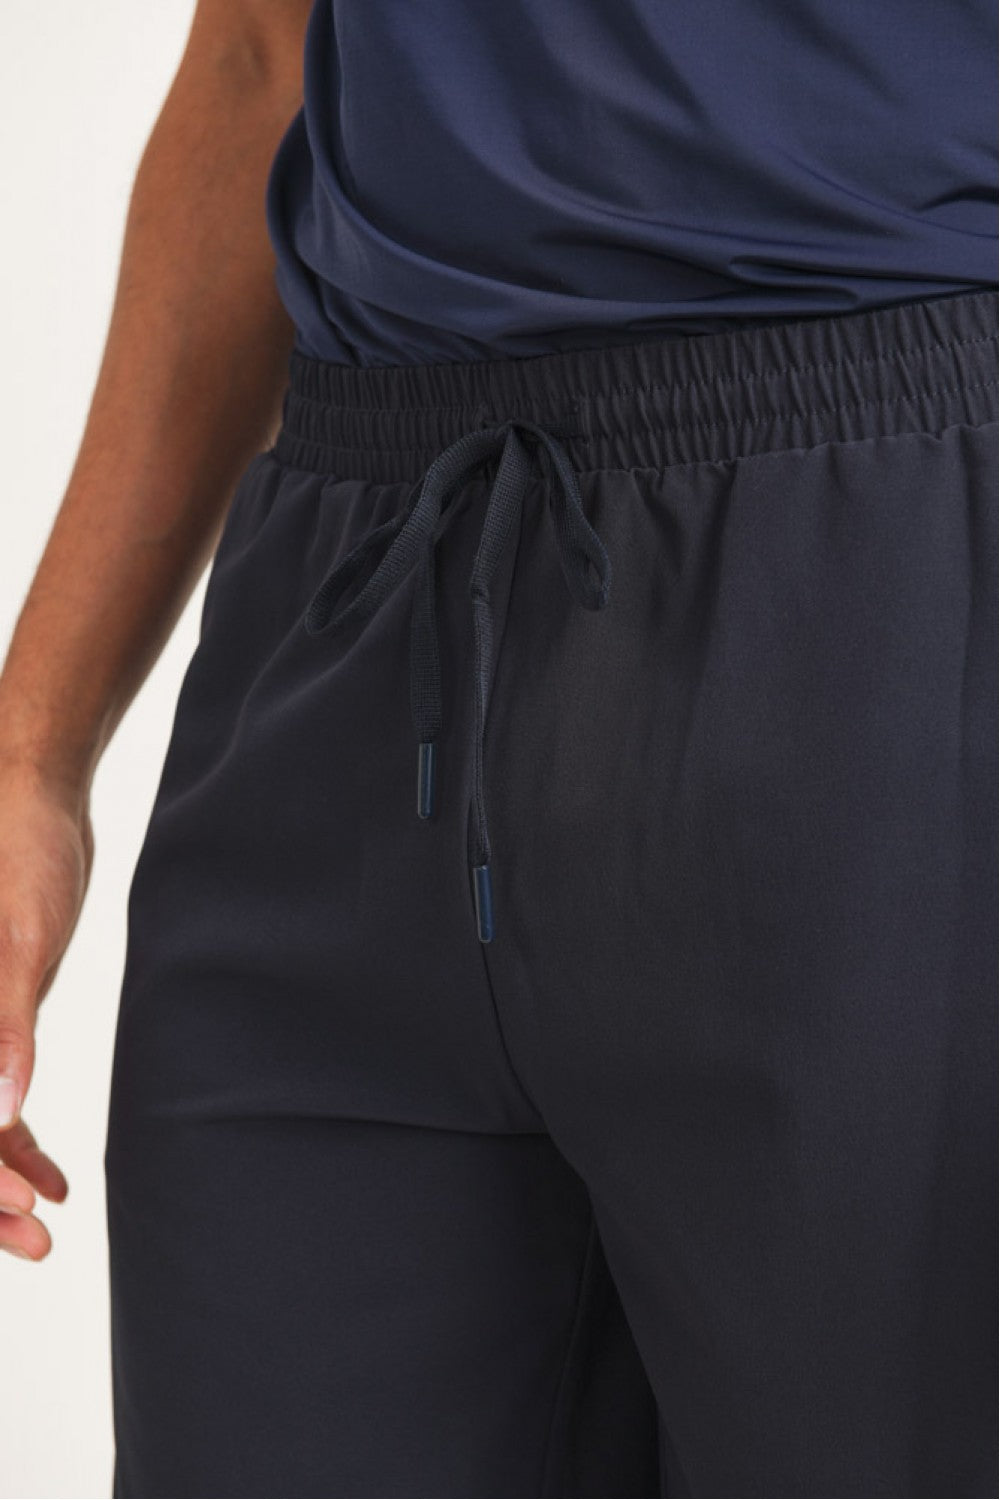 Active Drawstring Shorts with Zippered Pouch